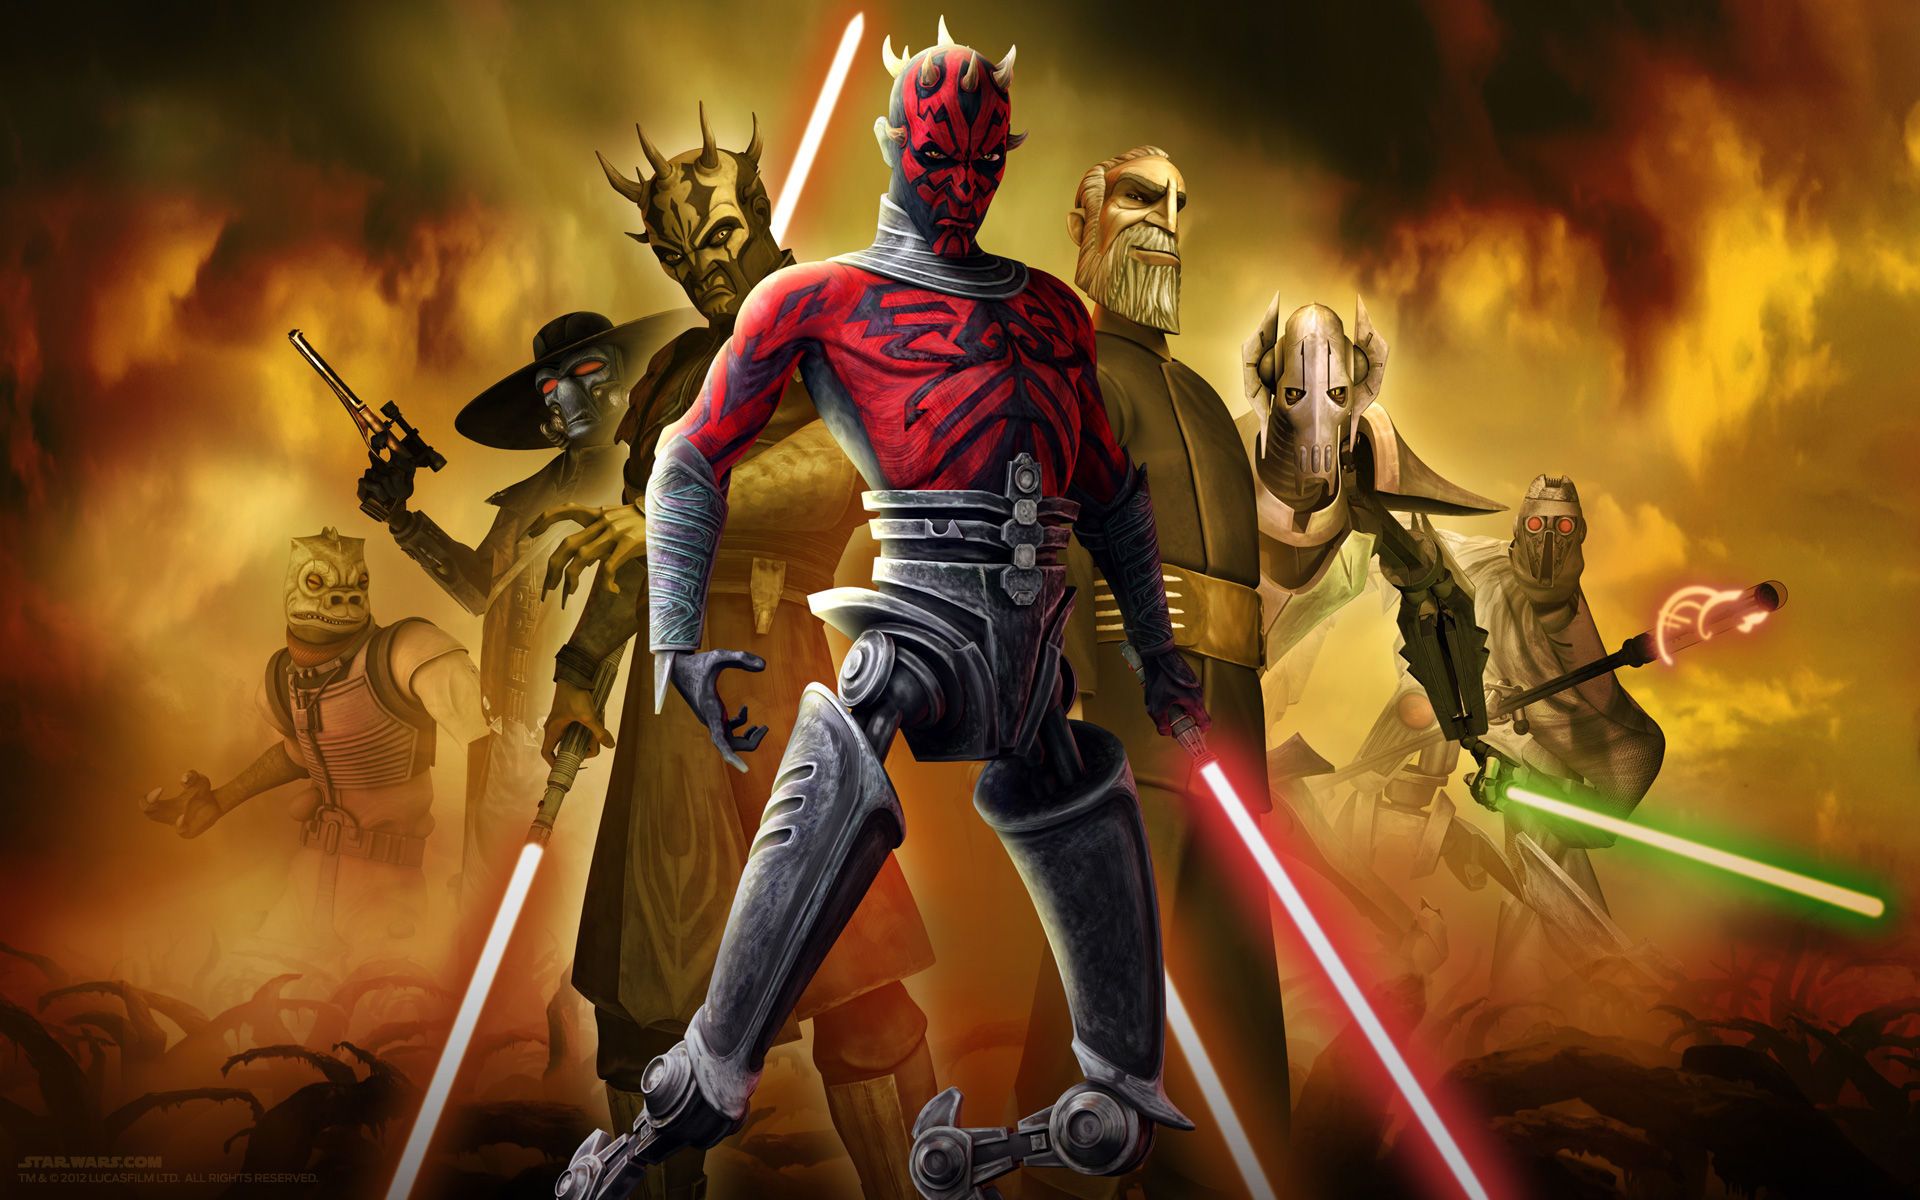 Clone Wars Villains - Darth Maul, Savage Opress, Count Dooku, General Grievous and Cad Bane